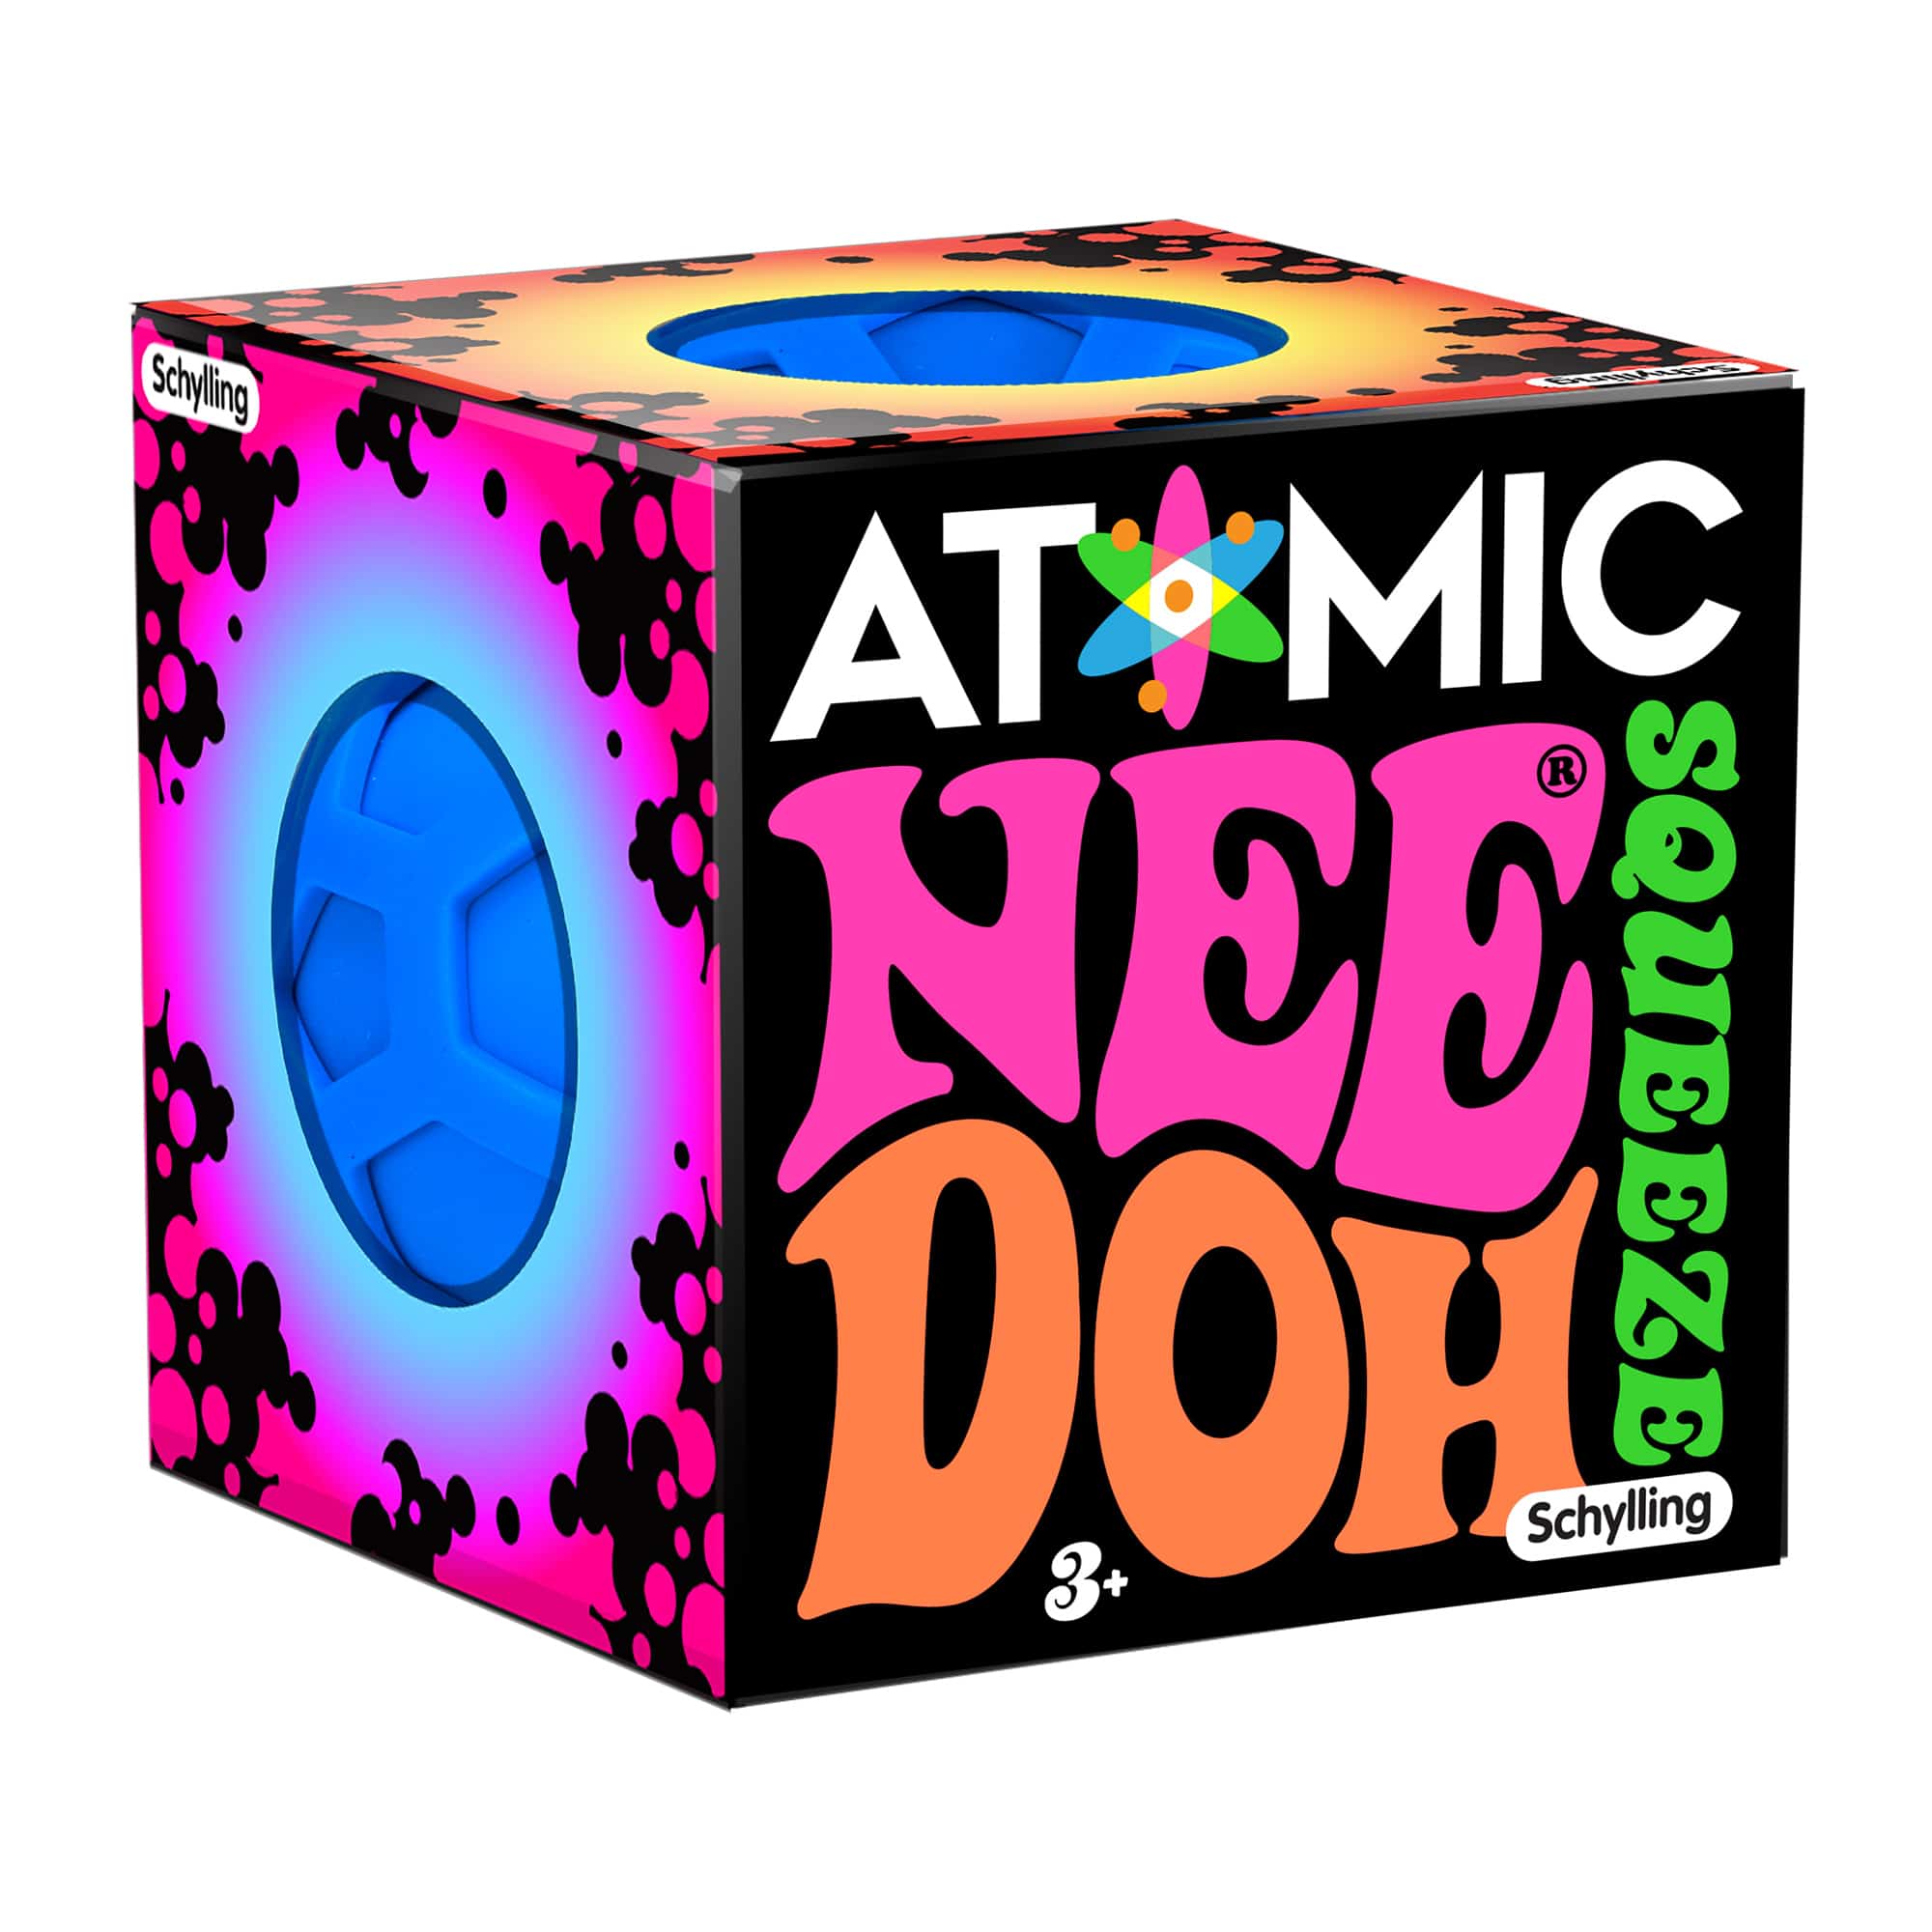 Atomic Nee Doh by Schylling # ATND